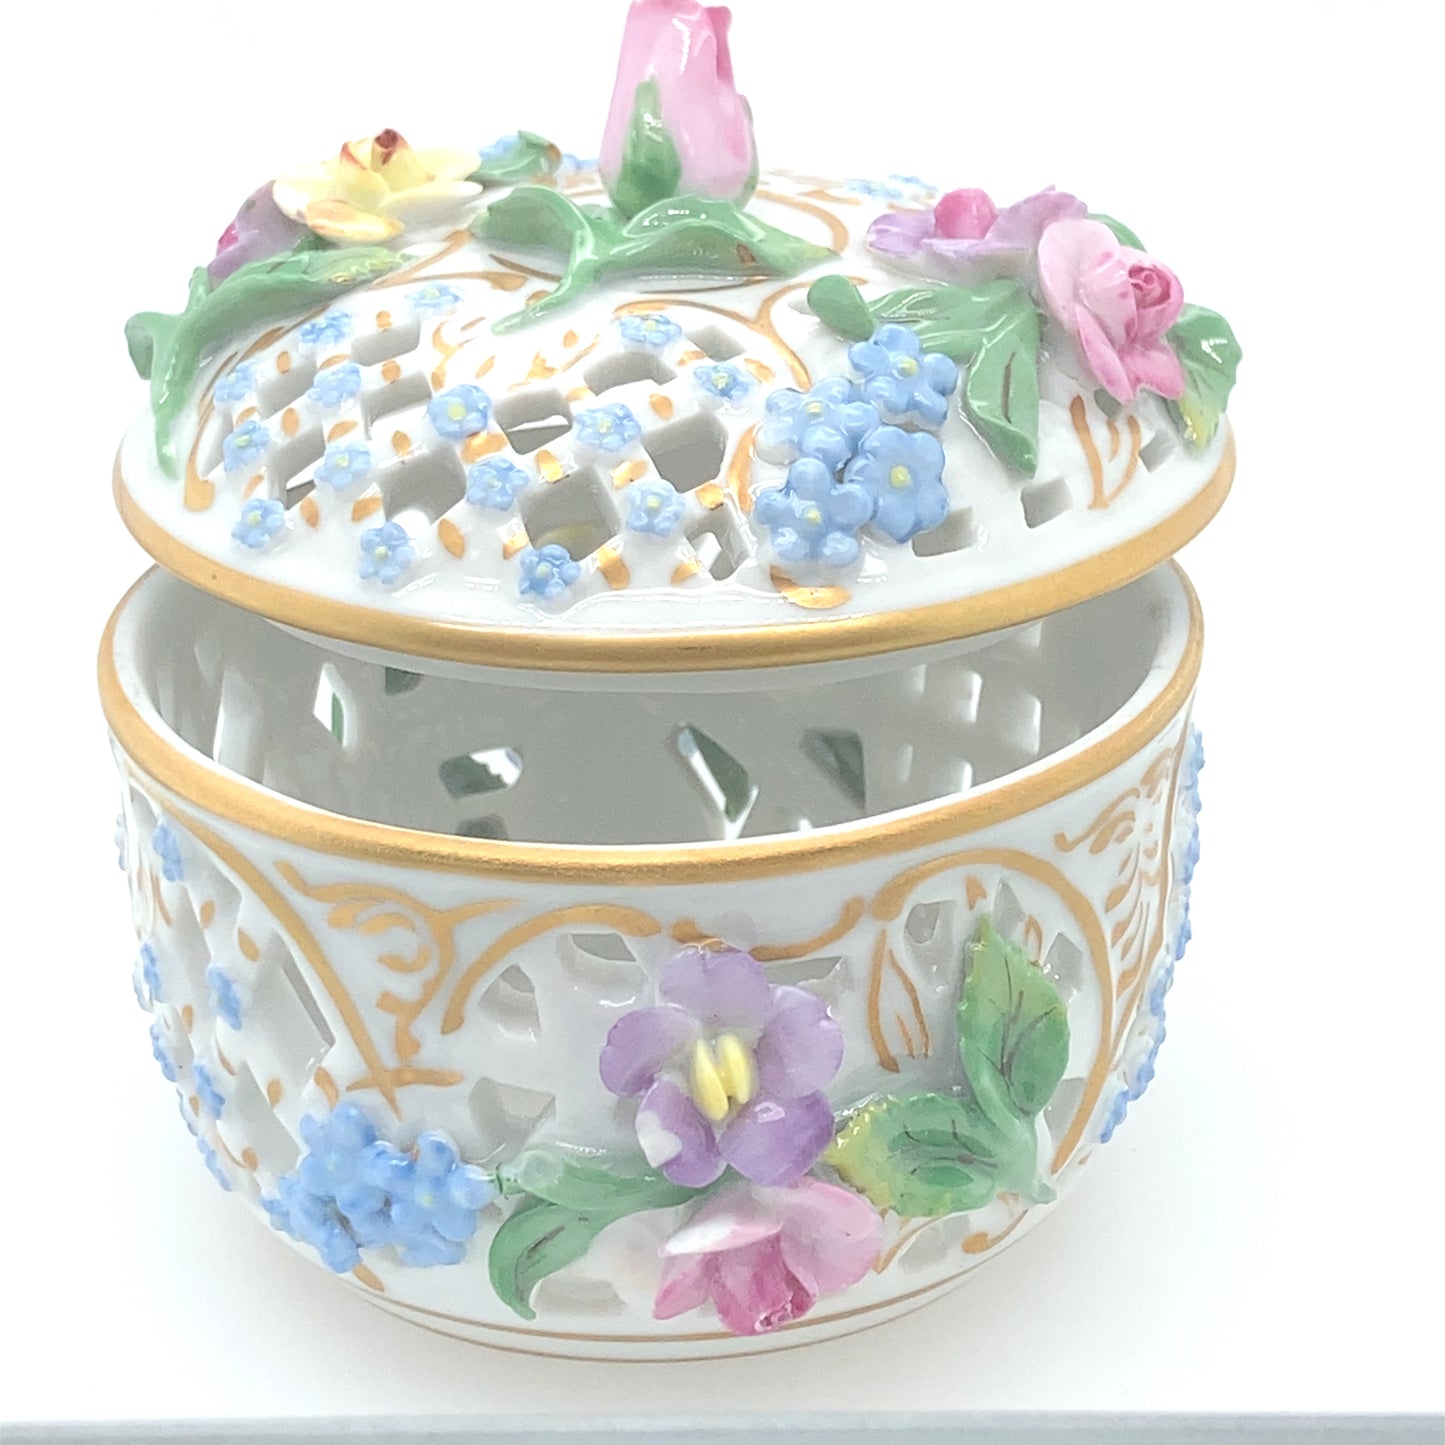 Porcelain figurine from Germany. Jewelry or candy box, hand painted designed with gold.